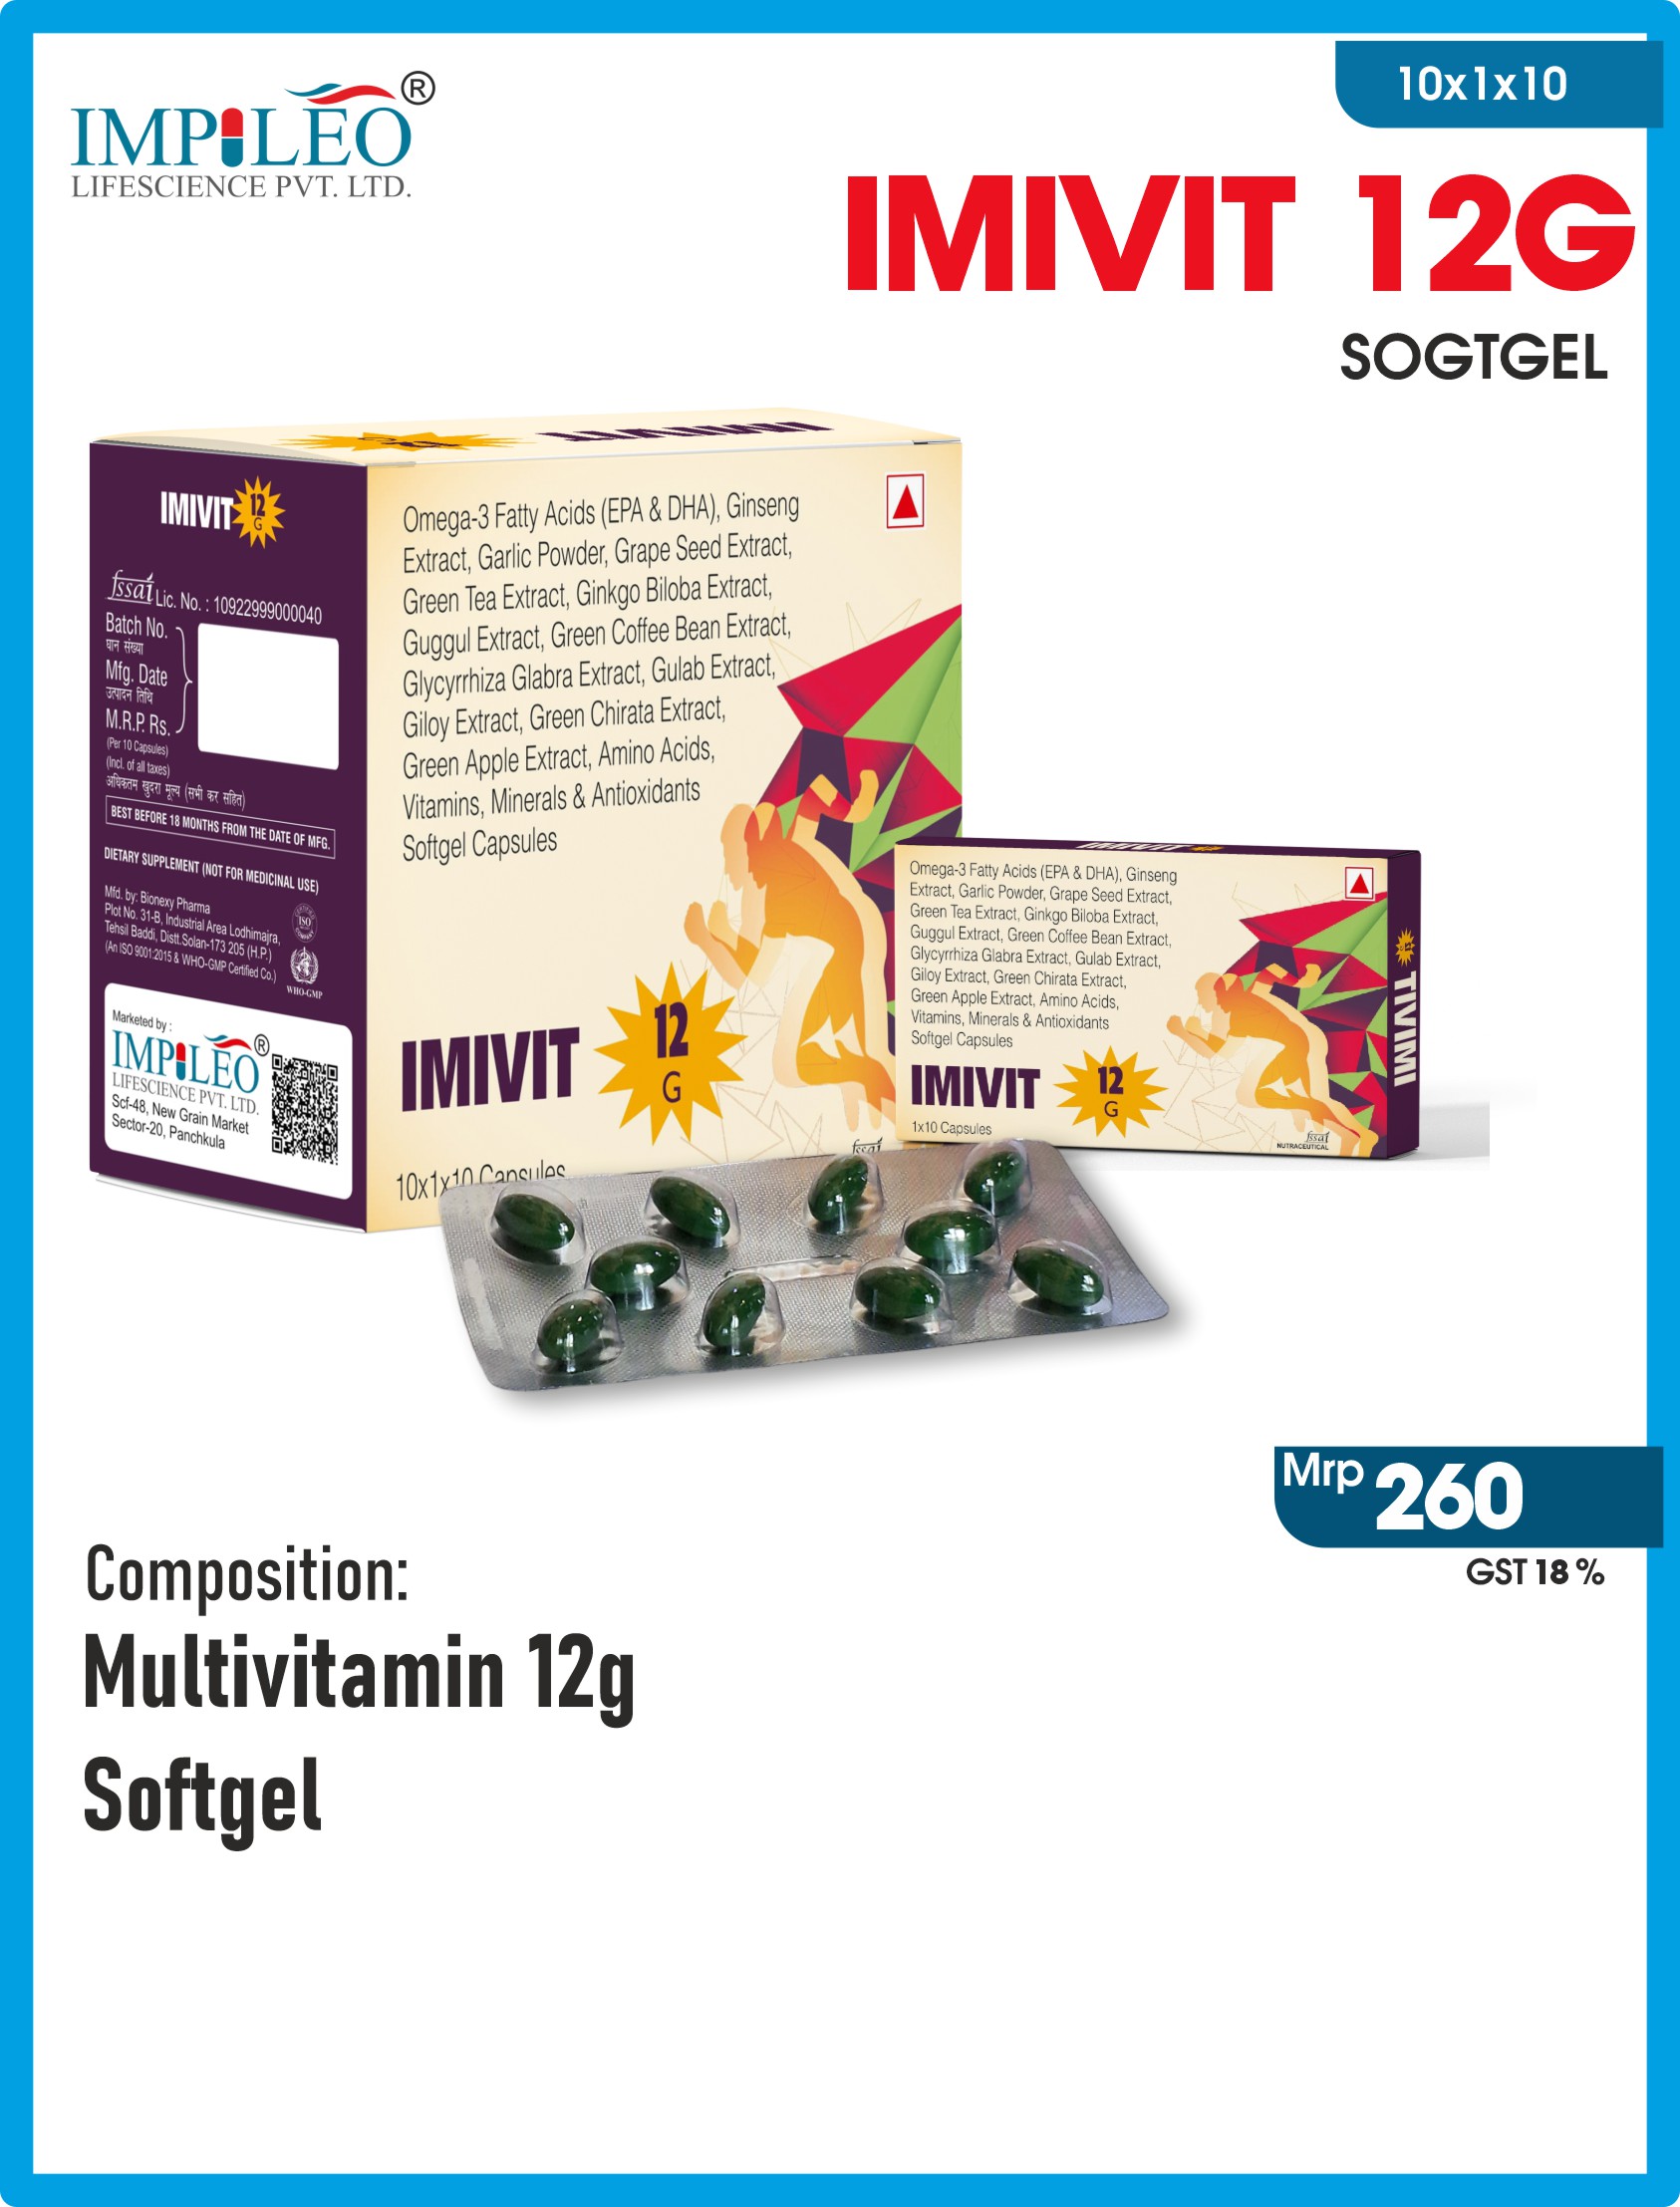 Optimize Wellness with IMIVIT 12G Softgel Capsules: Reliable Production Partners via PCD Pharma Franchise in Chandigarh